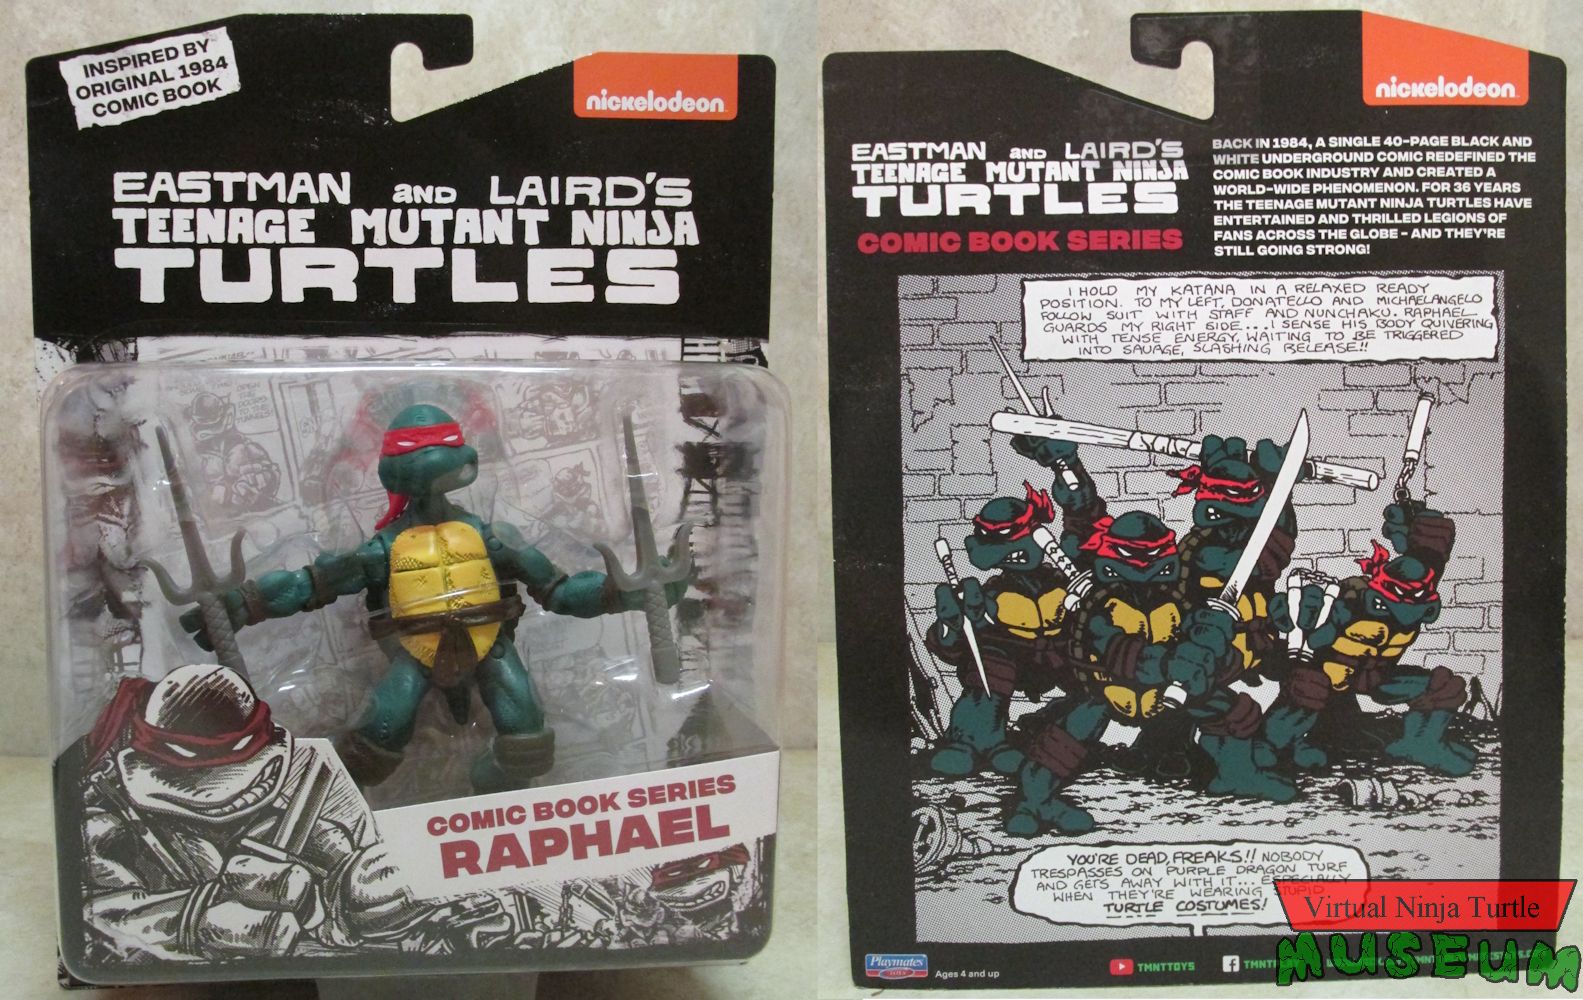 Comic Book Series Raphael MOC front and back